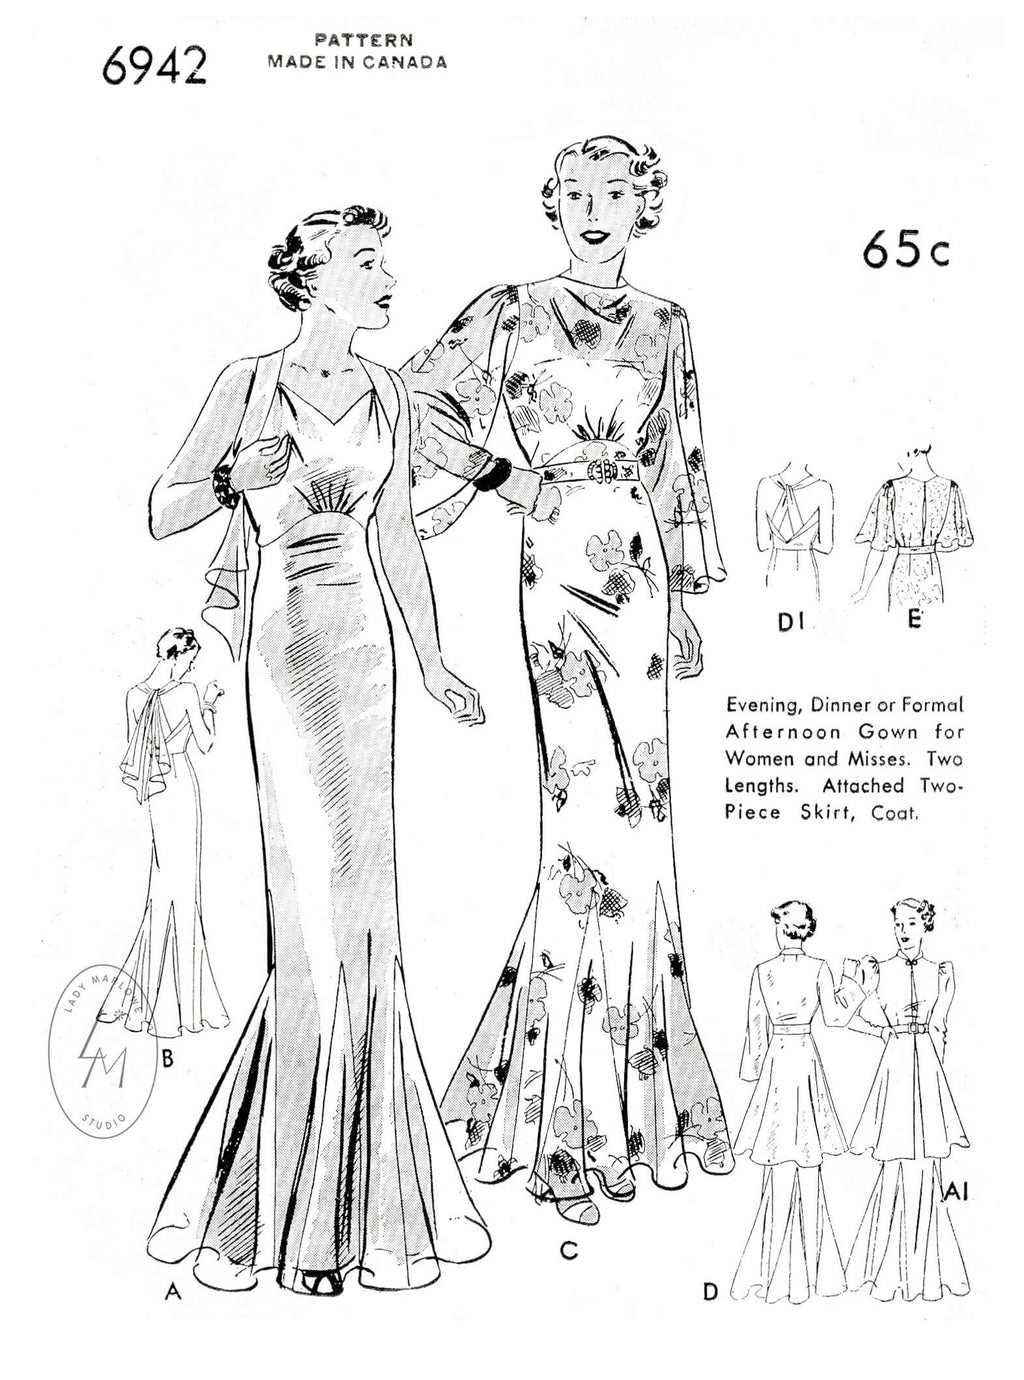 Butterick 6942 1930s wedding bridal dress vintage sewing pattern reproduction 5 styles with tunic blouse